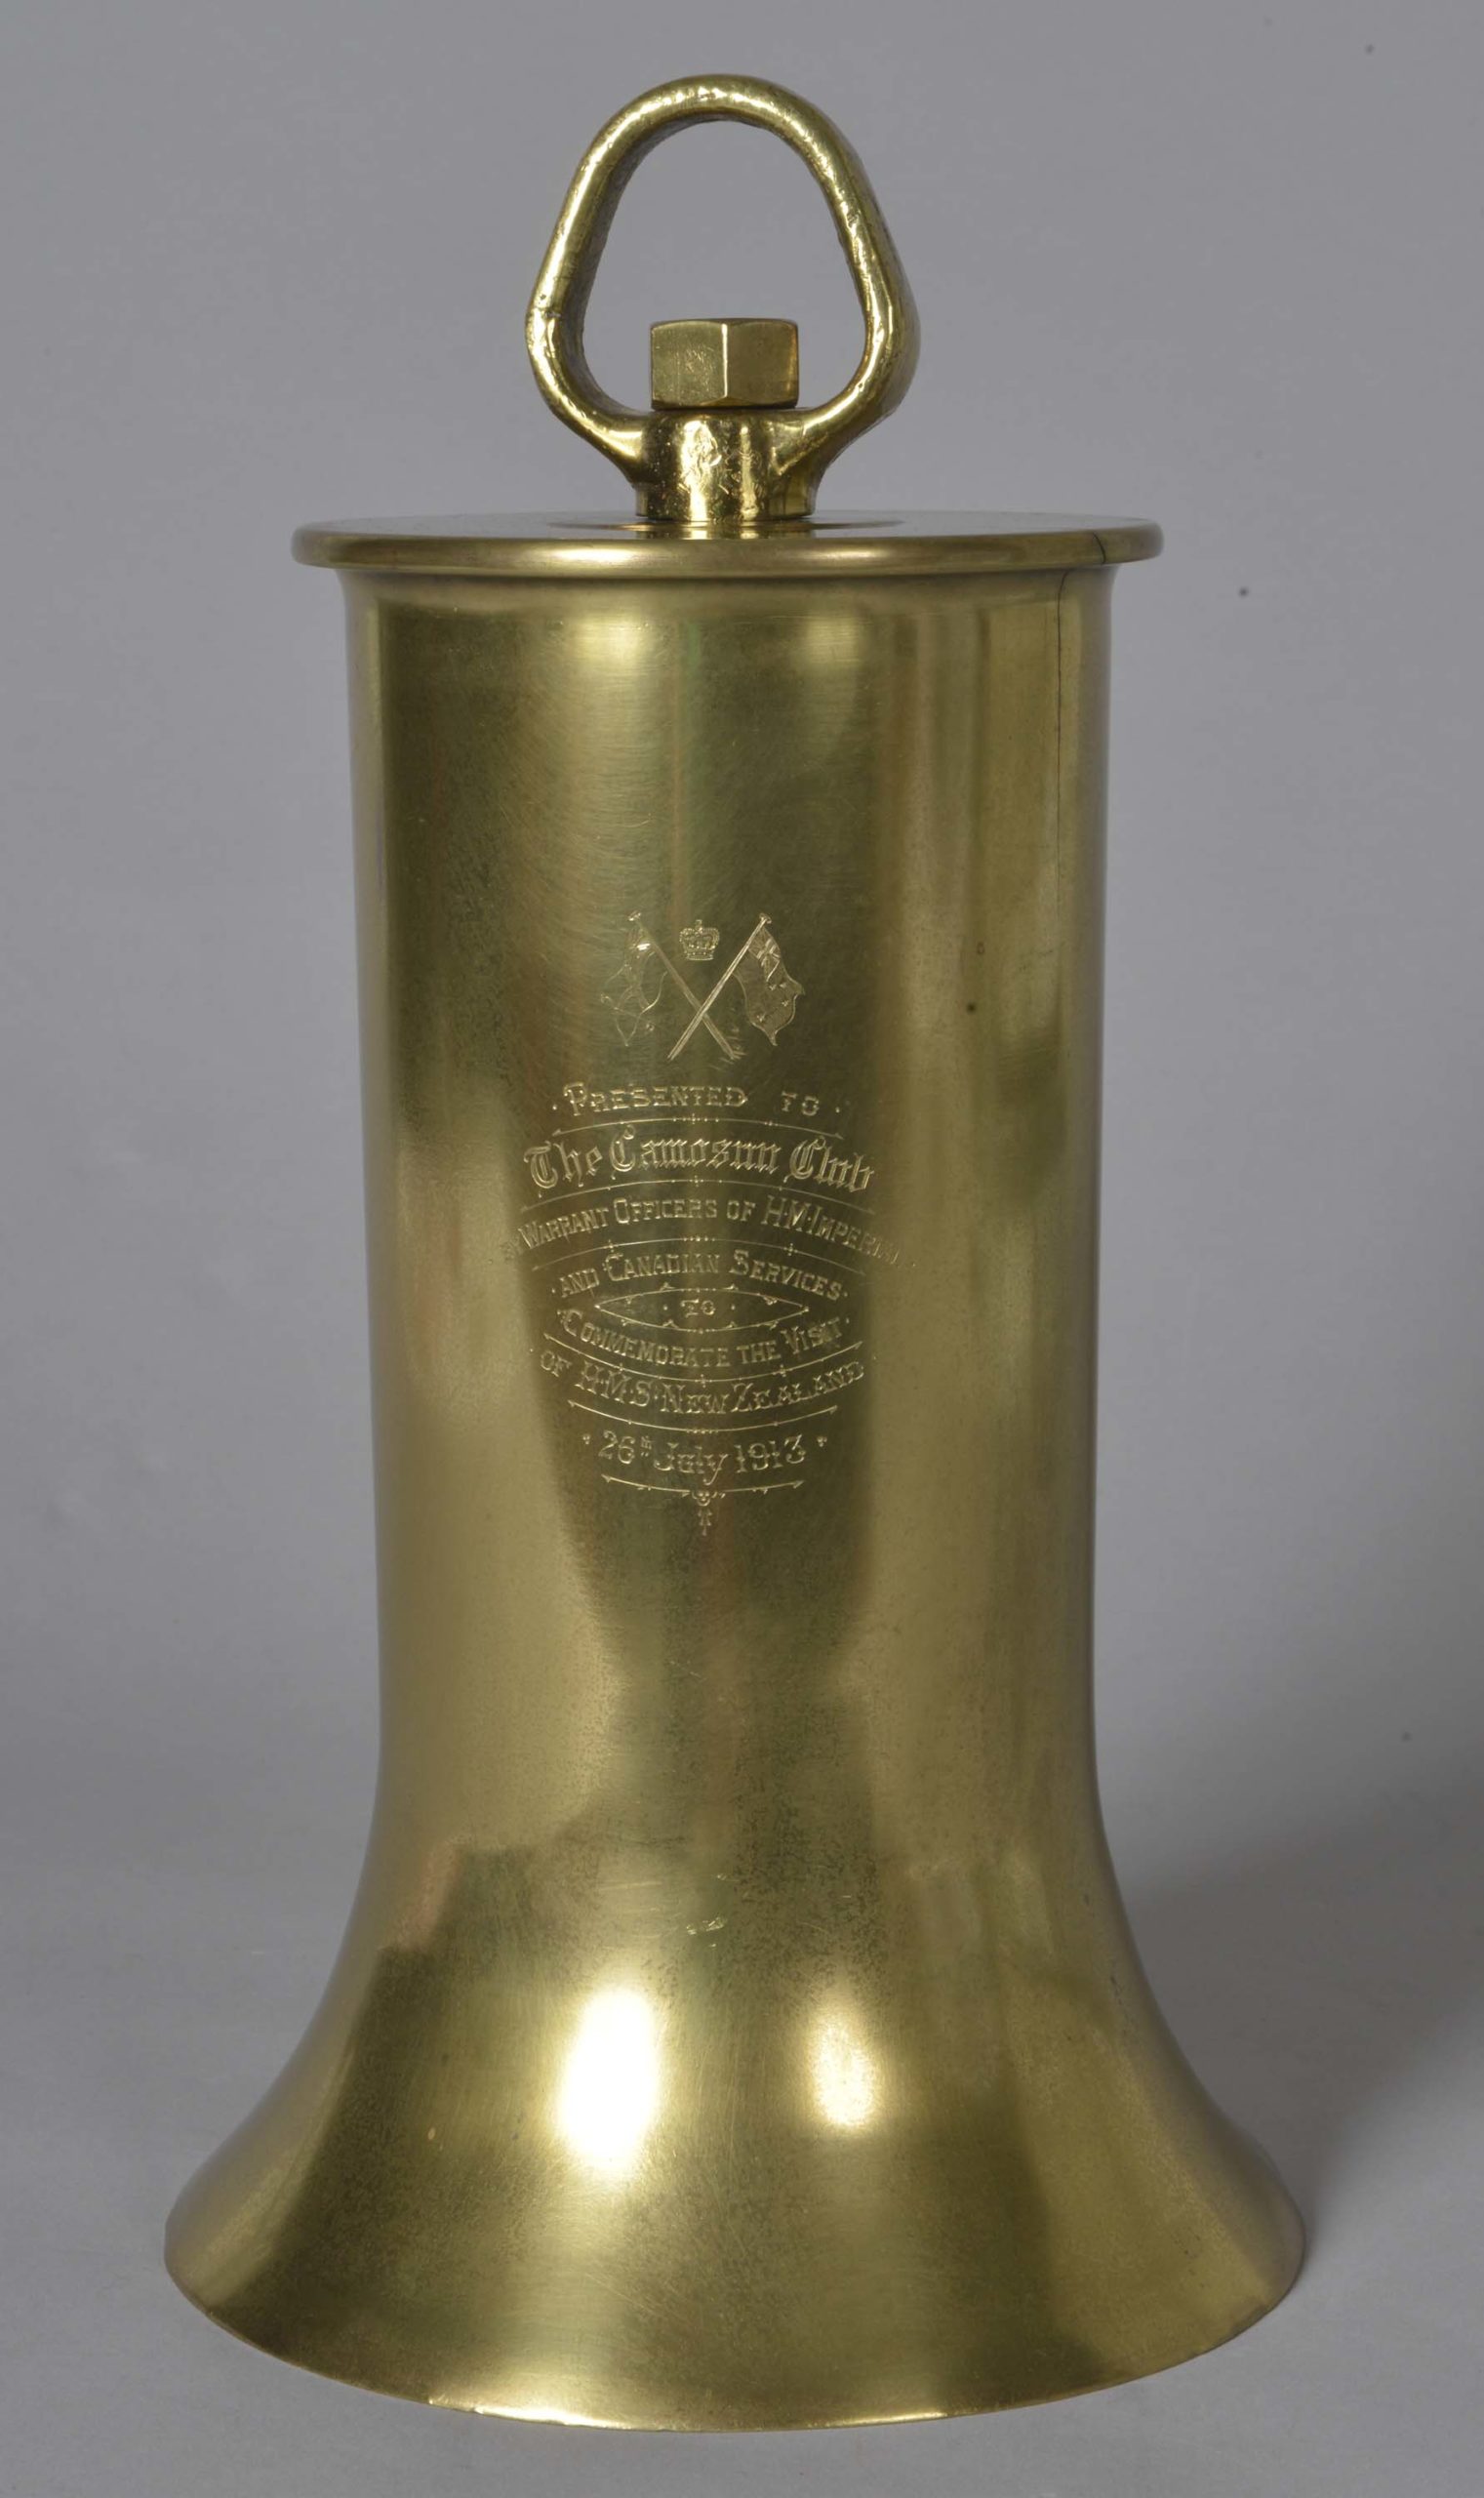 Brass presentation bell with clapper. Bell given to the Camosun Club of Victoria, British Colombia, by the Warrant Officers of HMS New Zealand. Inscribed on the bell are the words: ‘Presented to The Camosun Club by Warrant Officers of HM Imperial and Canadian Services to Commemorate the Visit of HMS New Zealand 26th July 1913’.